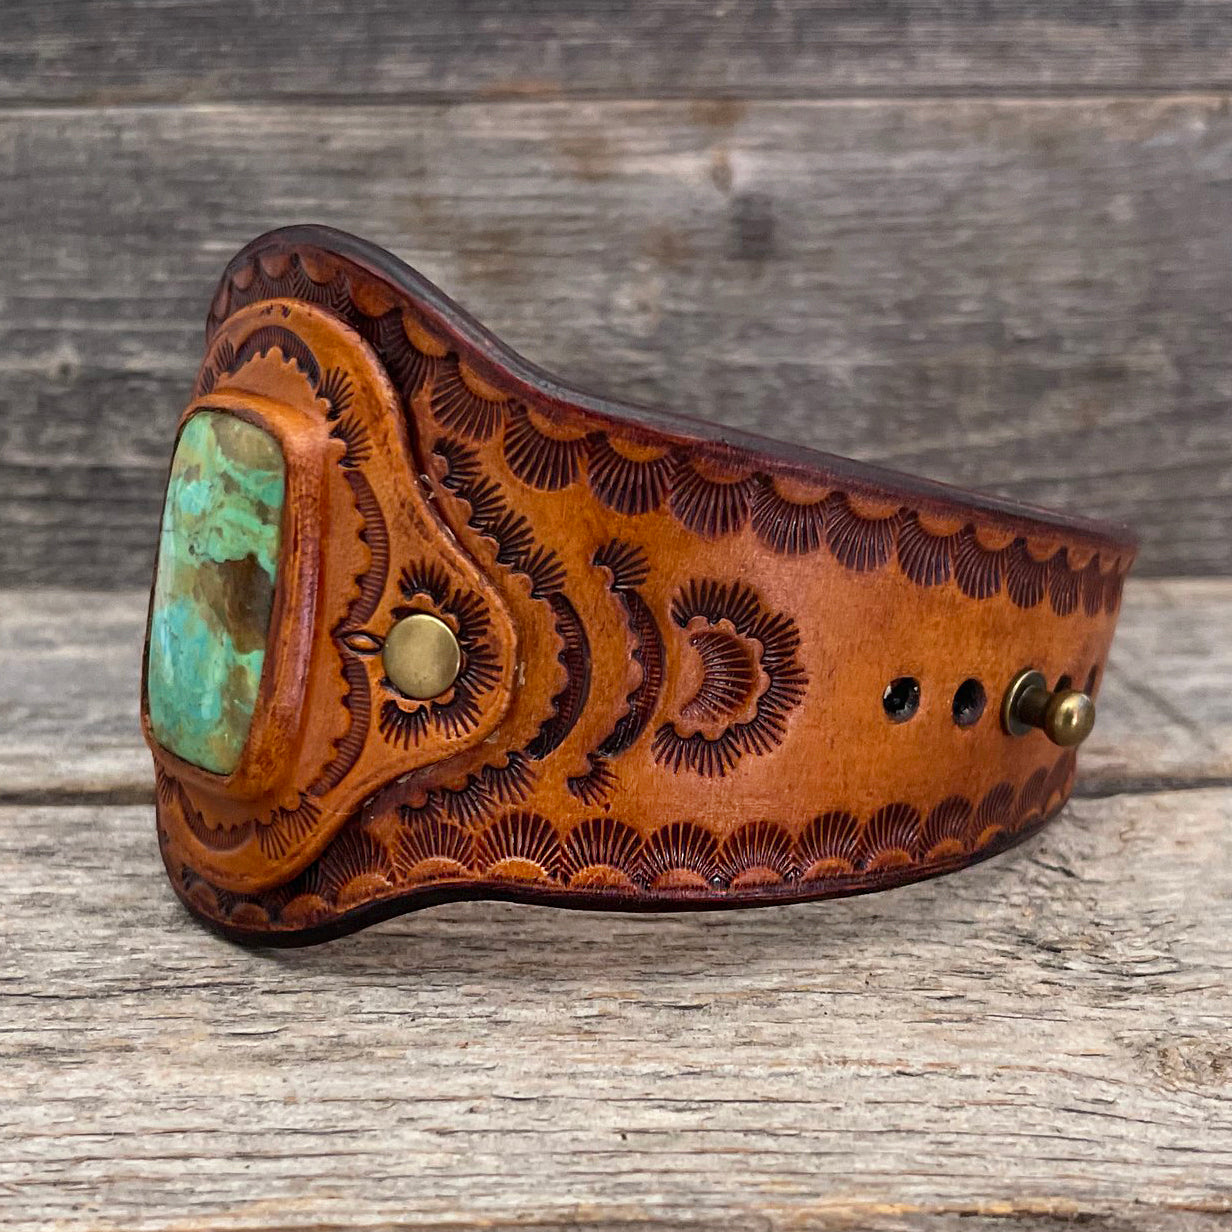 One of a Kind - leather  bracelet with Kingman Turquoise rectangle cabochon